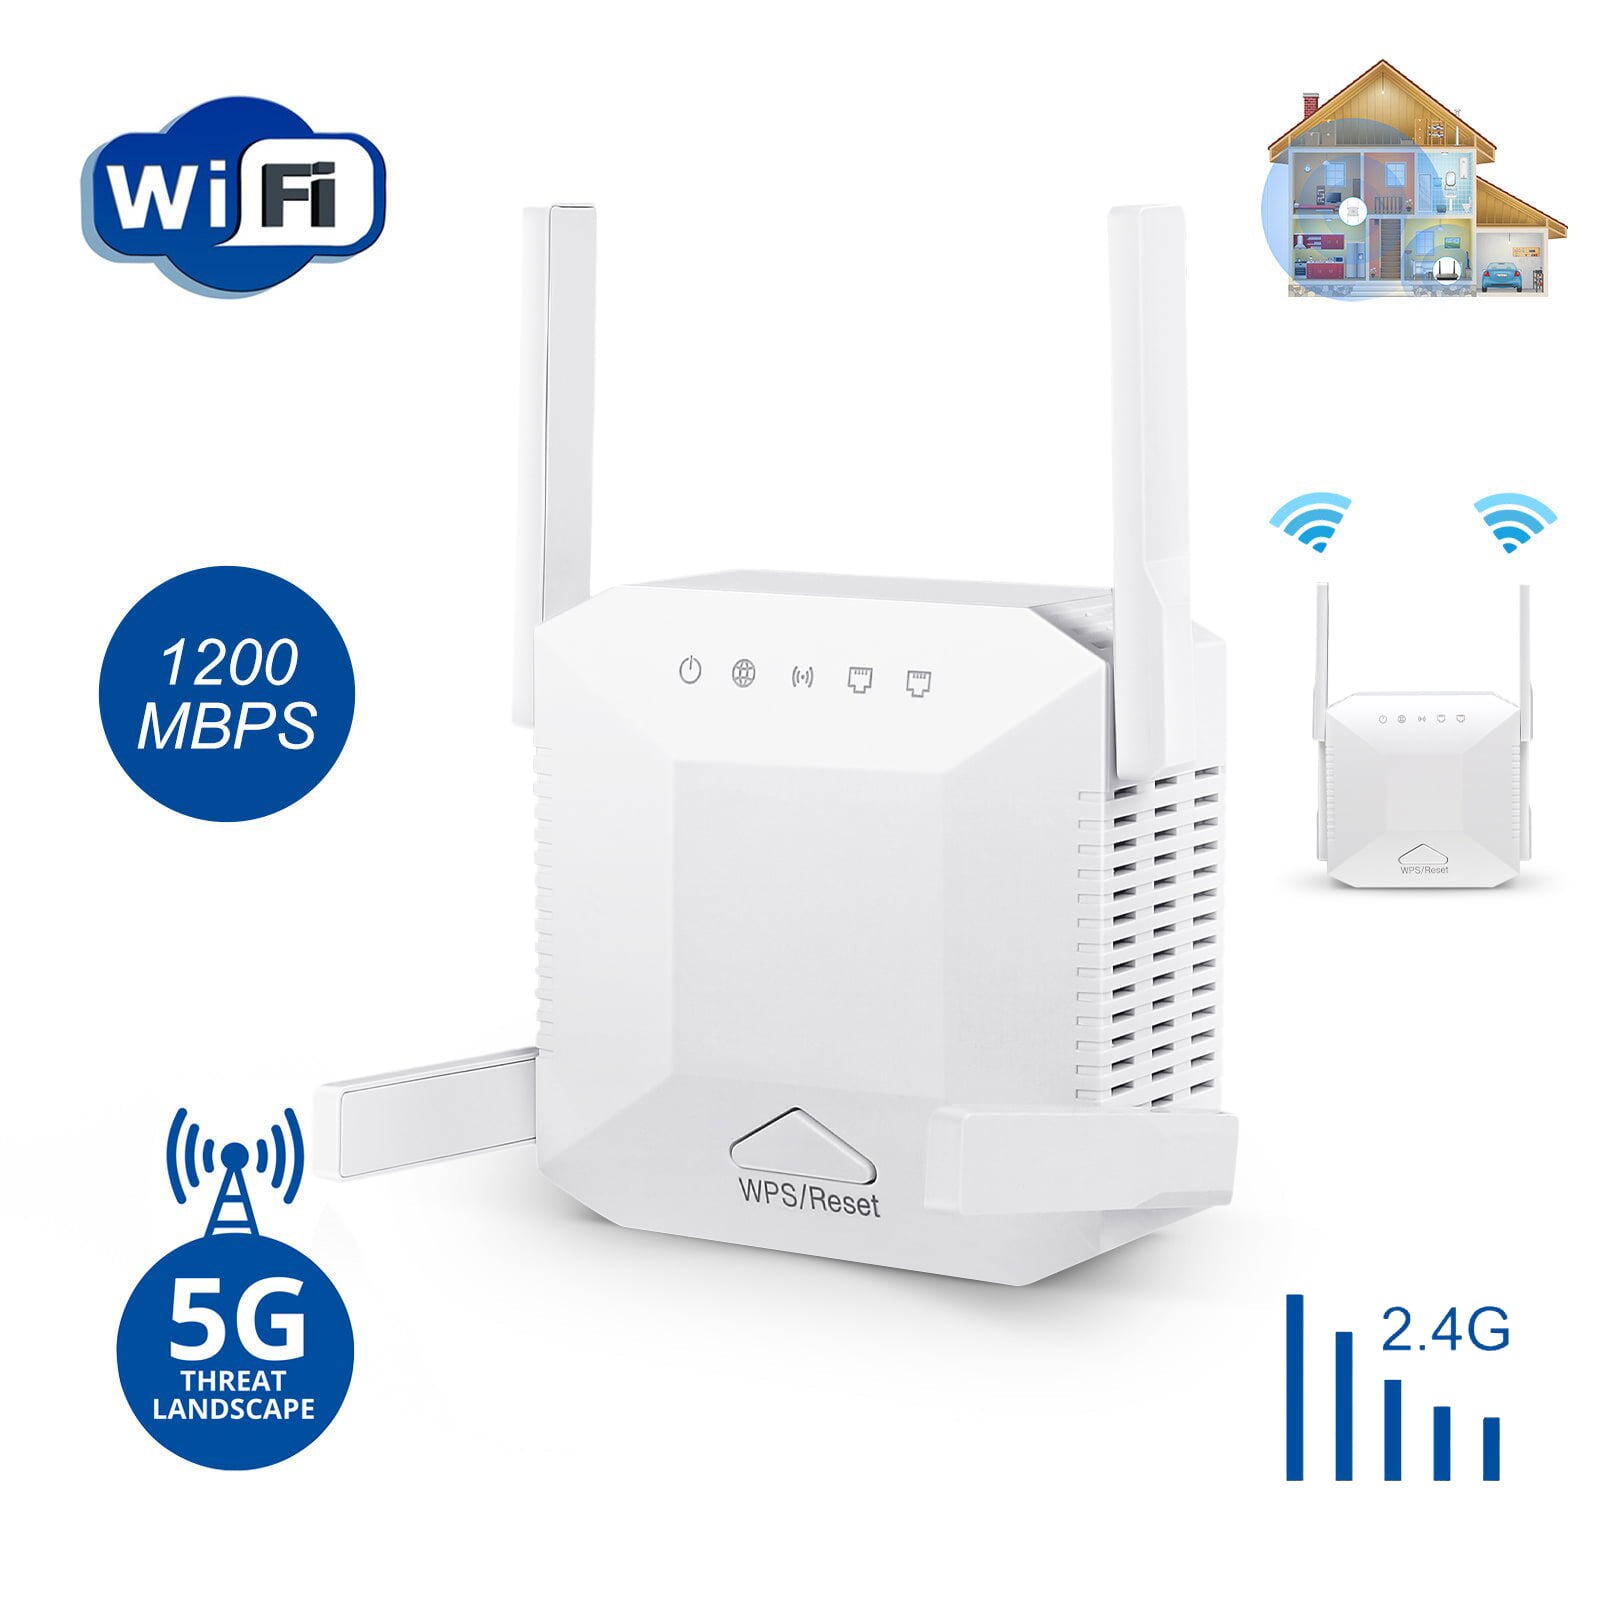 iFanze WiFi Extender, Up to 1200Mbps Speed, Covers Up to 1300 Sq.ft, Dual Band WiFi Repeater, WiFi Booster to Extend Range of WiFi Internet Connection